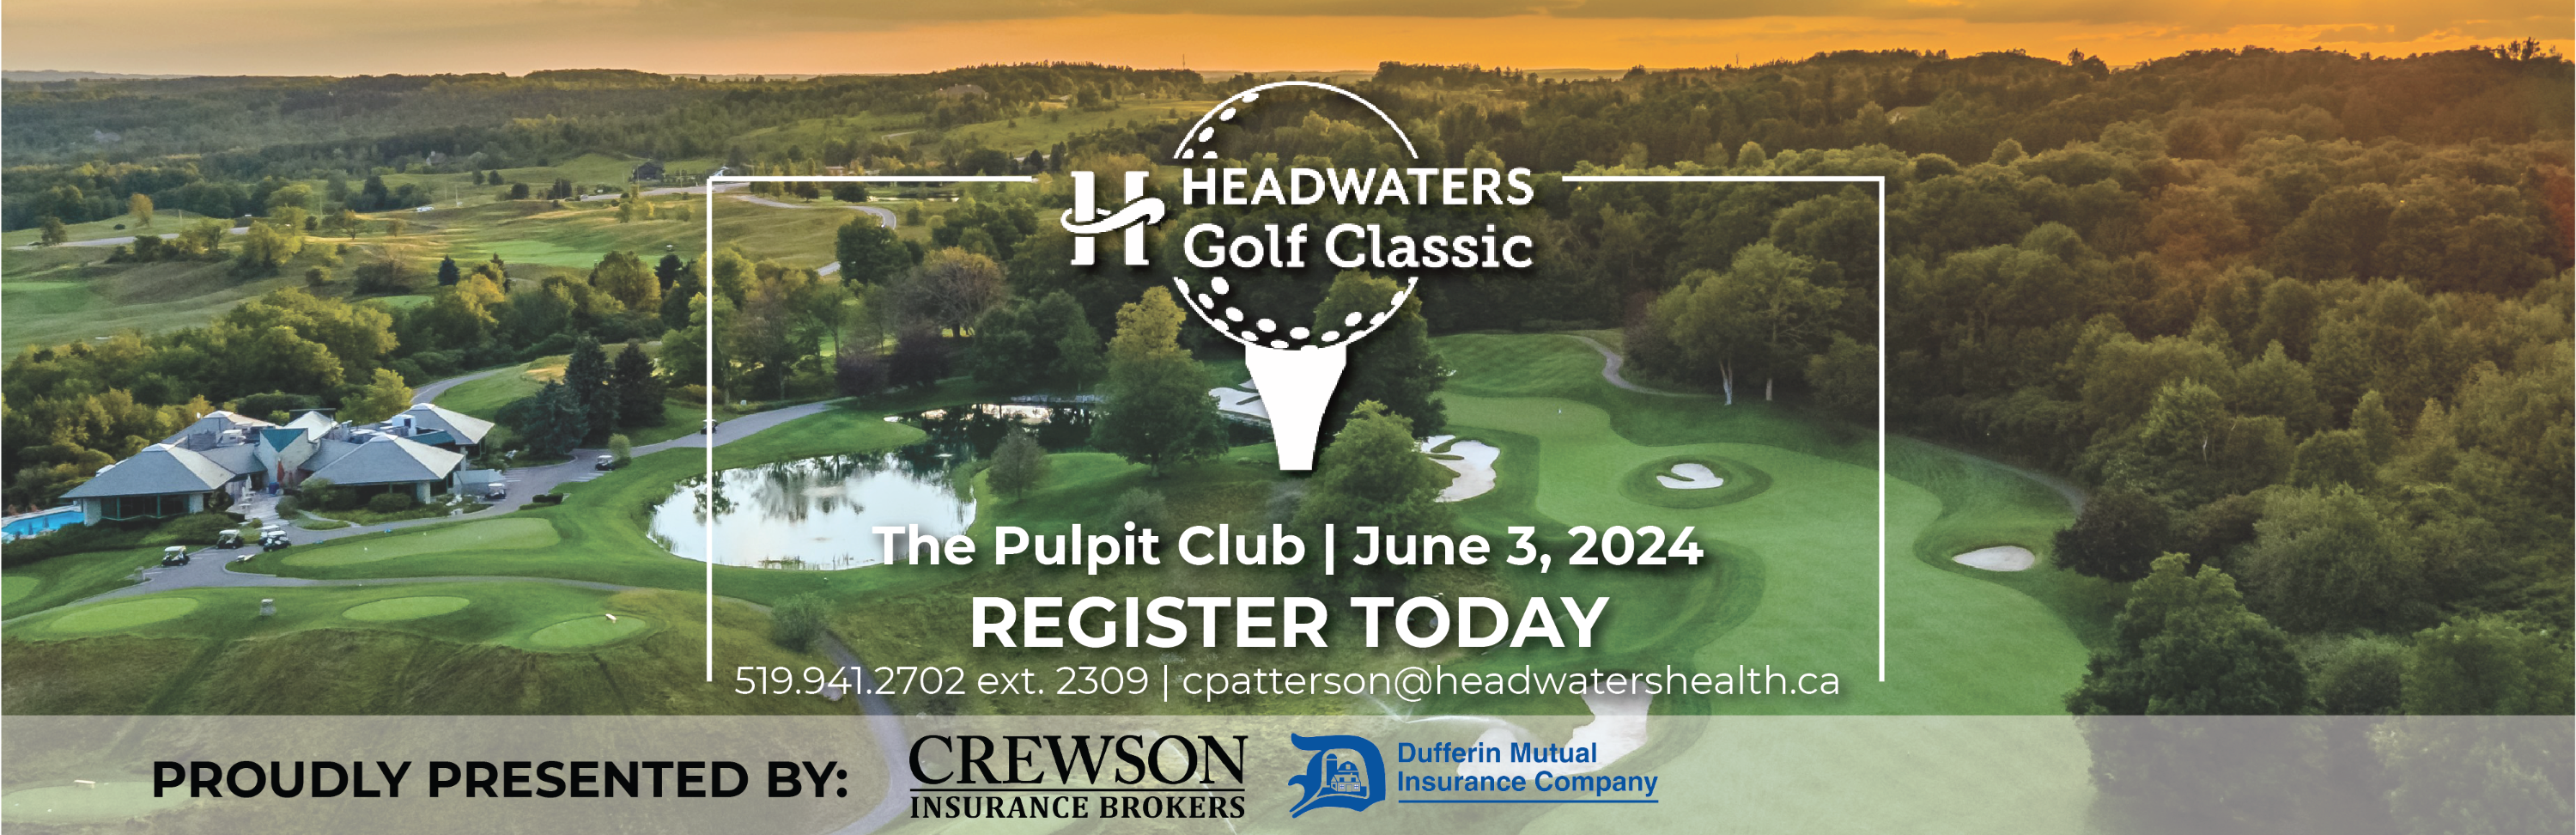 Headwaters Golf Classic, Join us as a sponsor today!